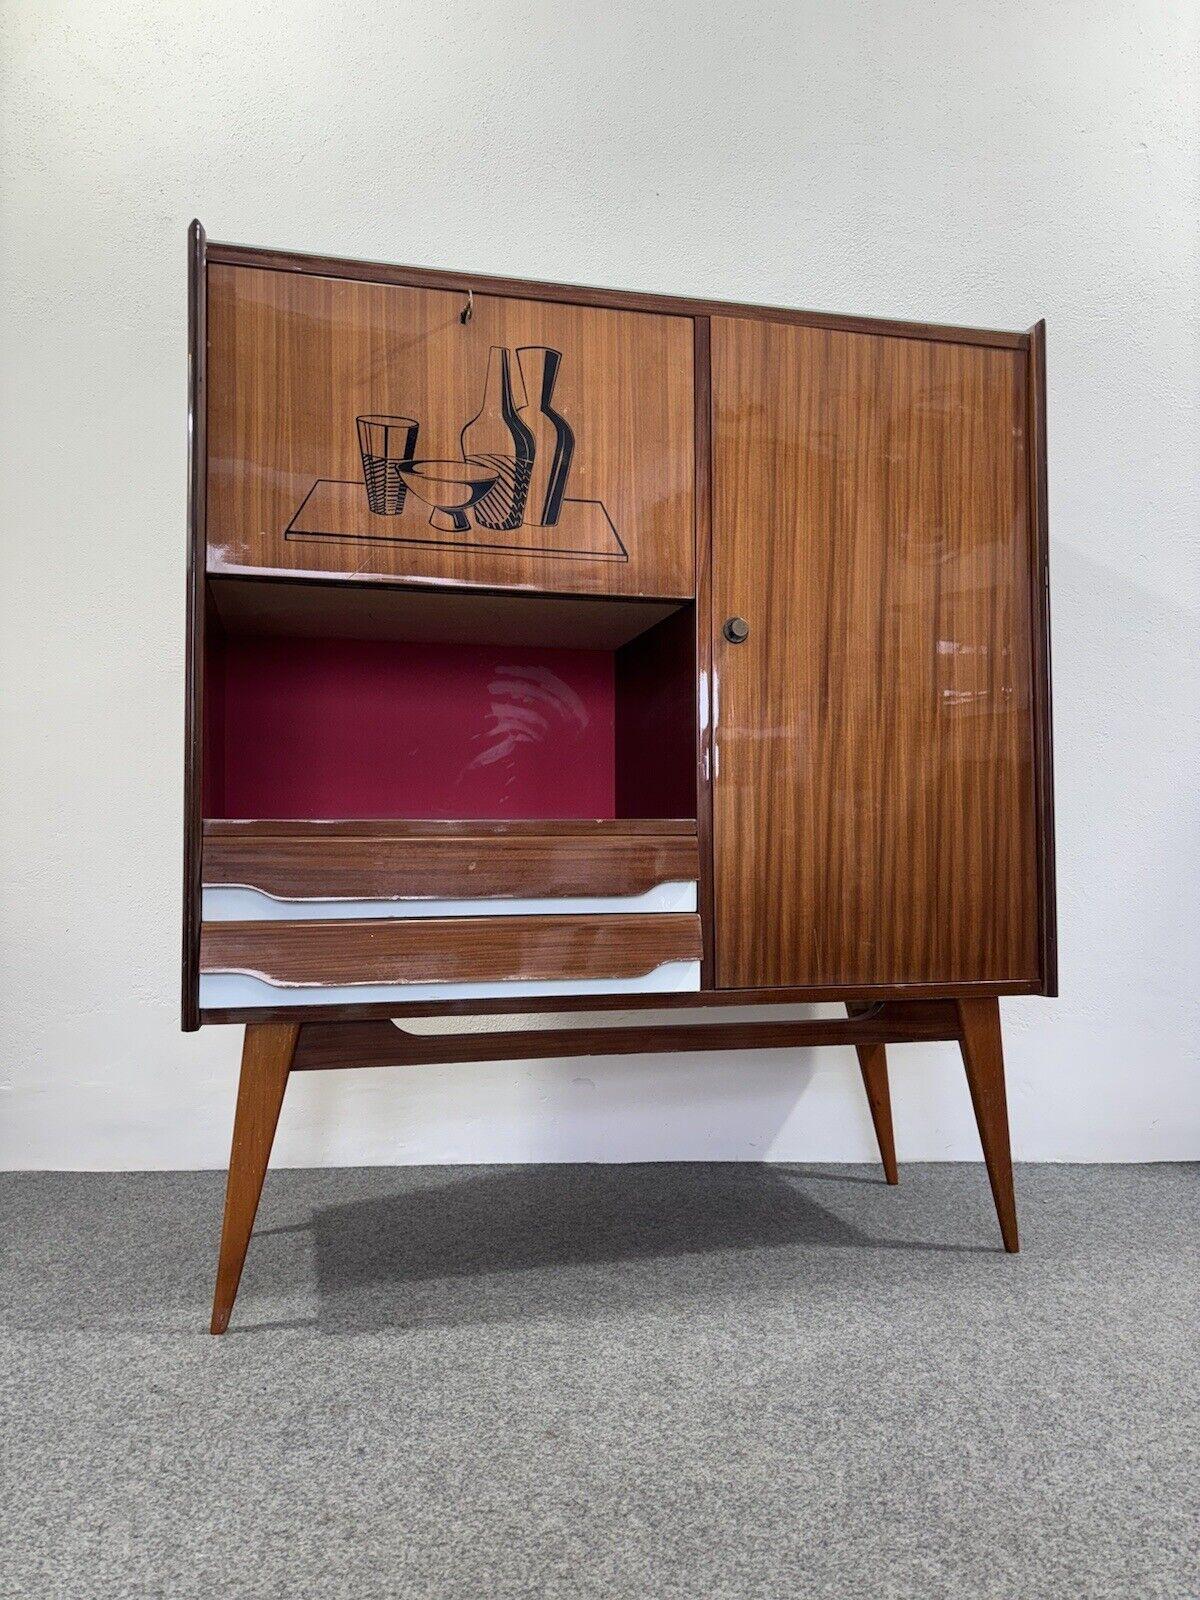 Mid-Century Scandinavian Style Sideboard Modern Design 1950's.

All-wood frame, glass top, retractable bar top.

The item is in excellent conservative condition, there is no aesthetic or structural defect and important the report, only slight and